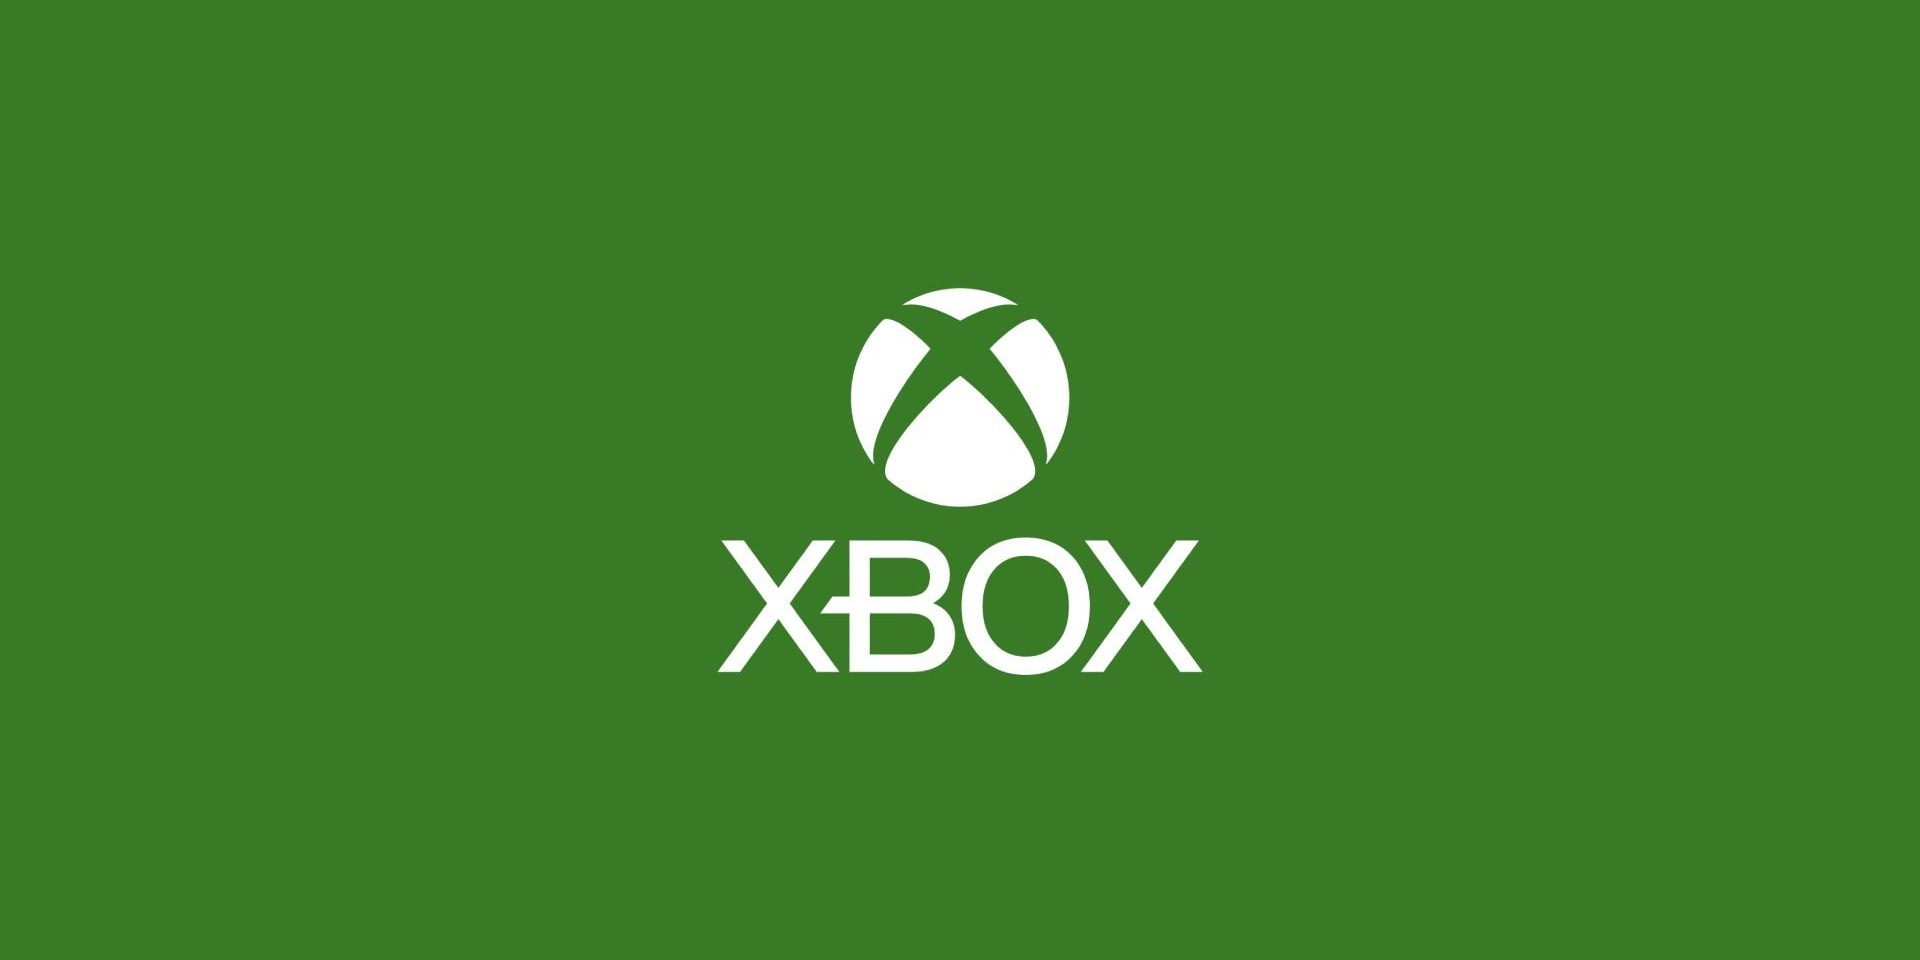 Xbox adds enforcement strike system to improve safety and transparency